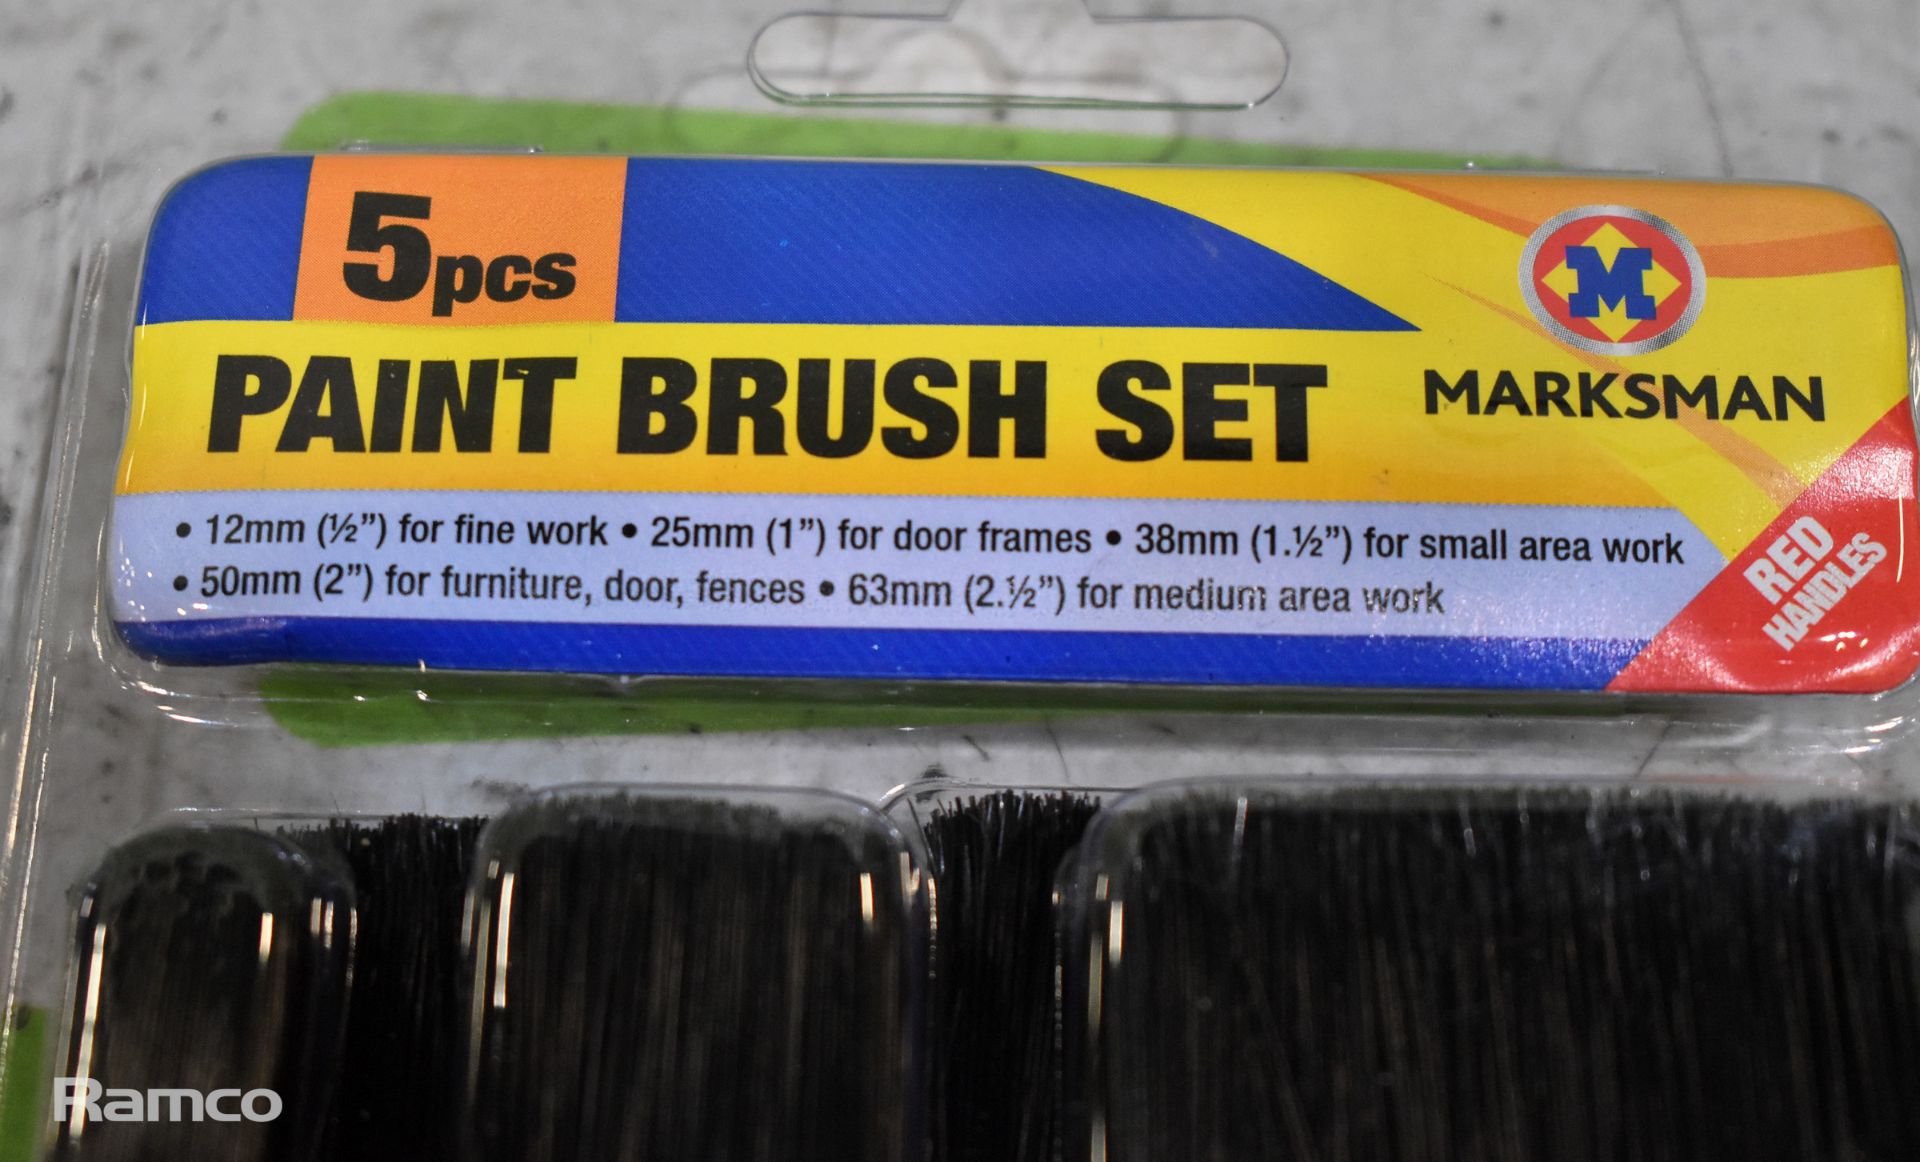 3 boxes of Marksman 5 piece paint brush sets - 48 packs per box - Image 4 of 5